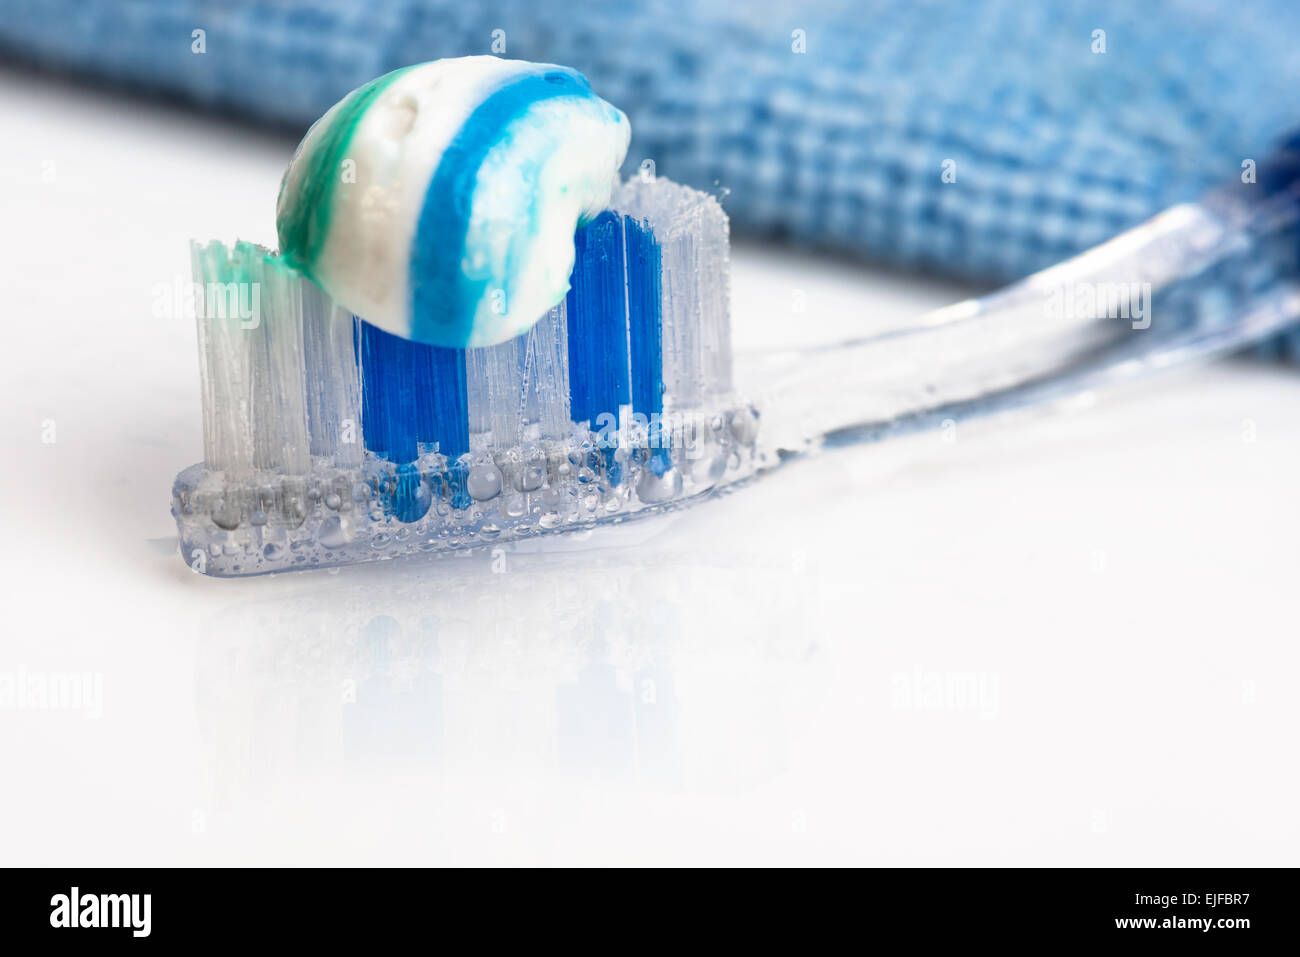 toothbrush and toothpaste, towel, water spray. close-up Stock Photo - Alamy